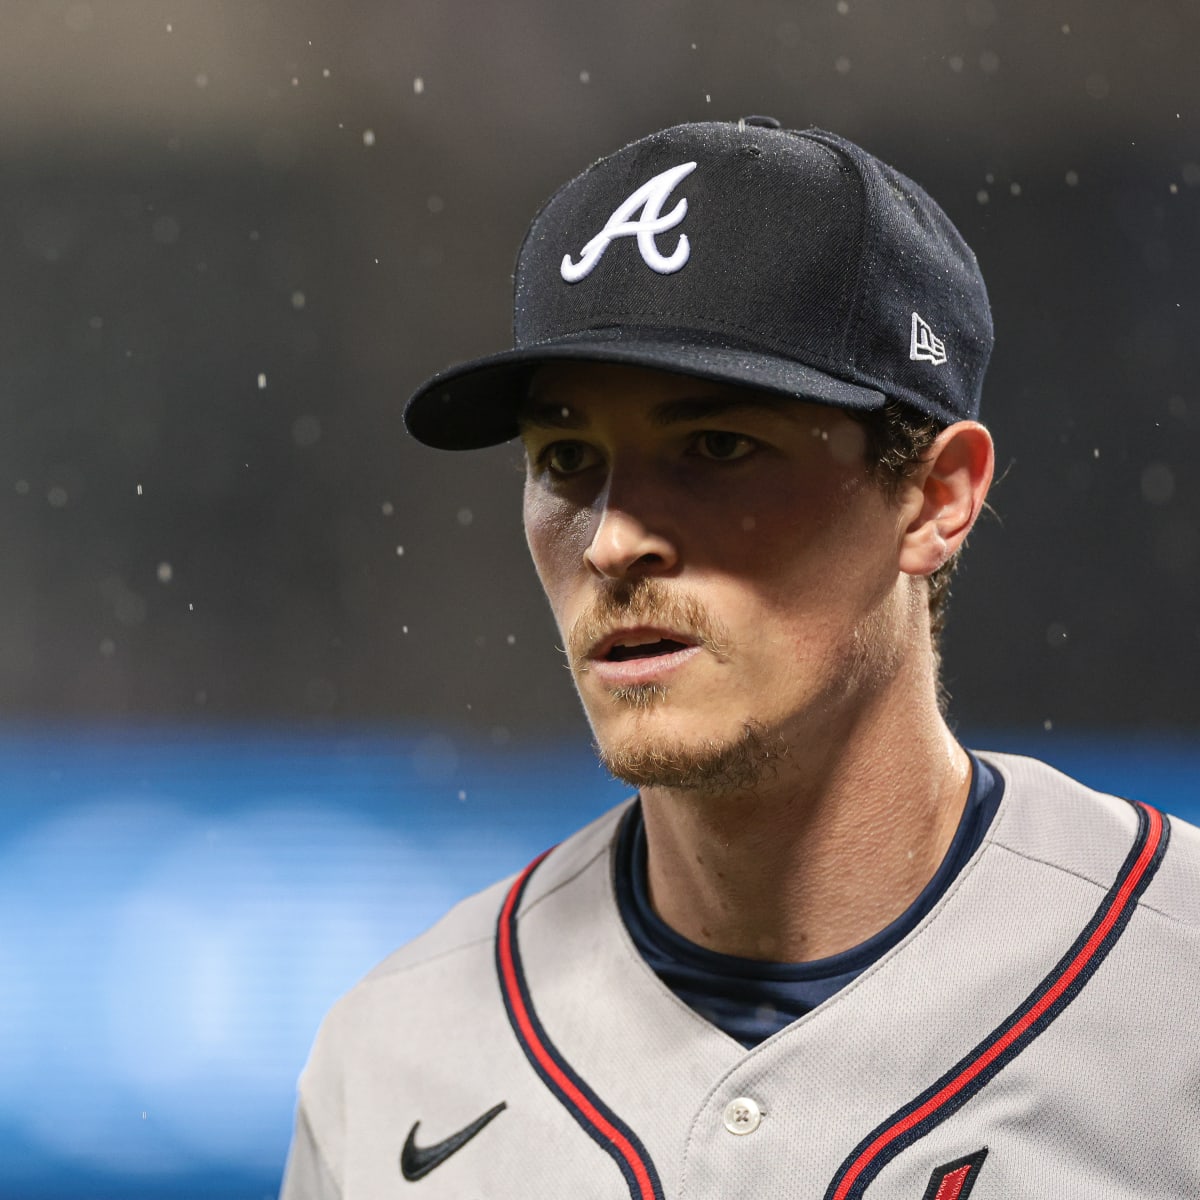 Braves ace Max Fried makes rehab start at Triple-A Gwinnett, first